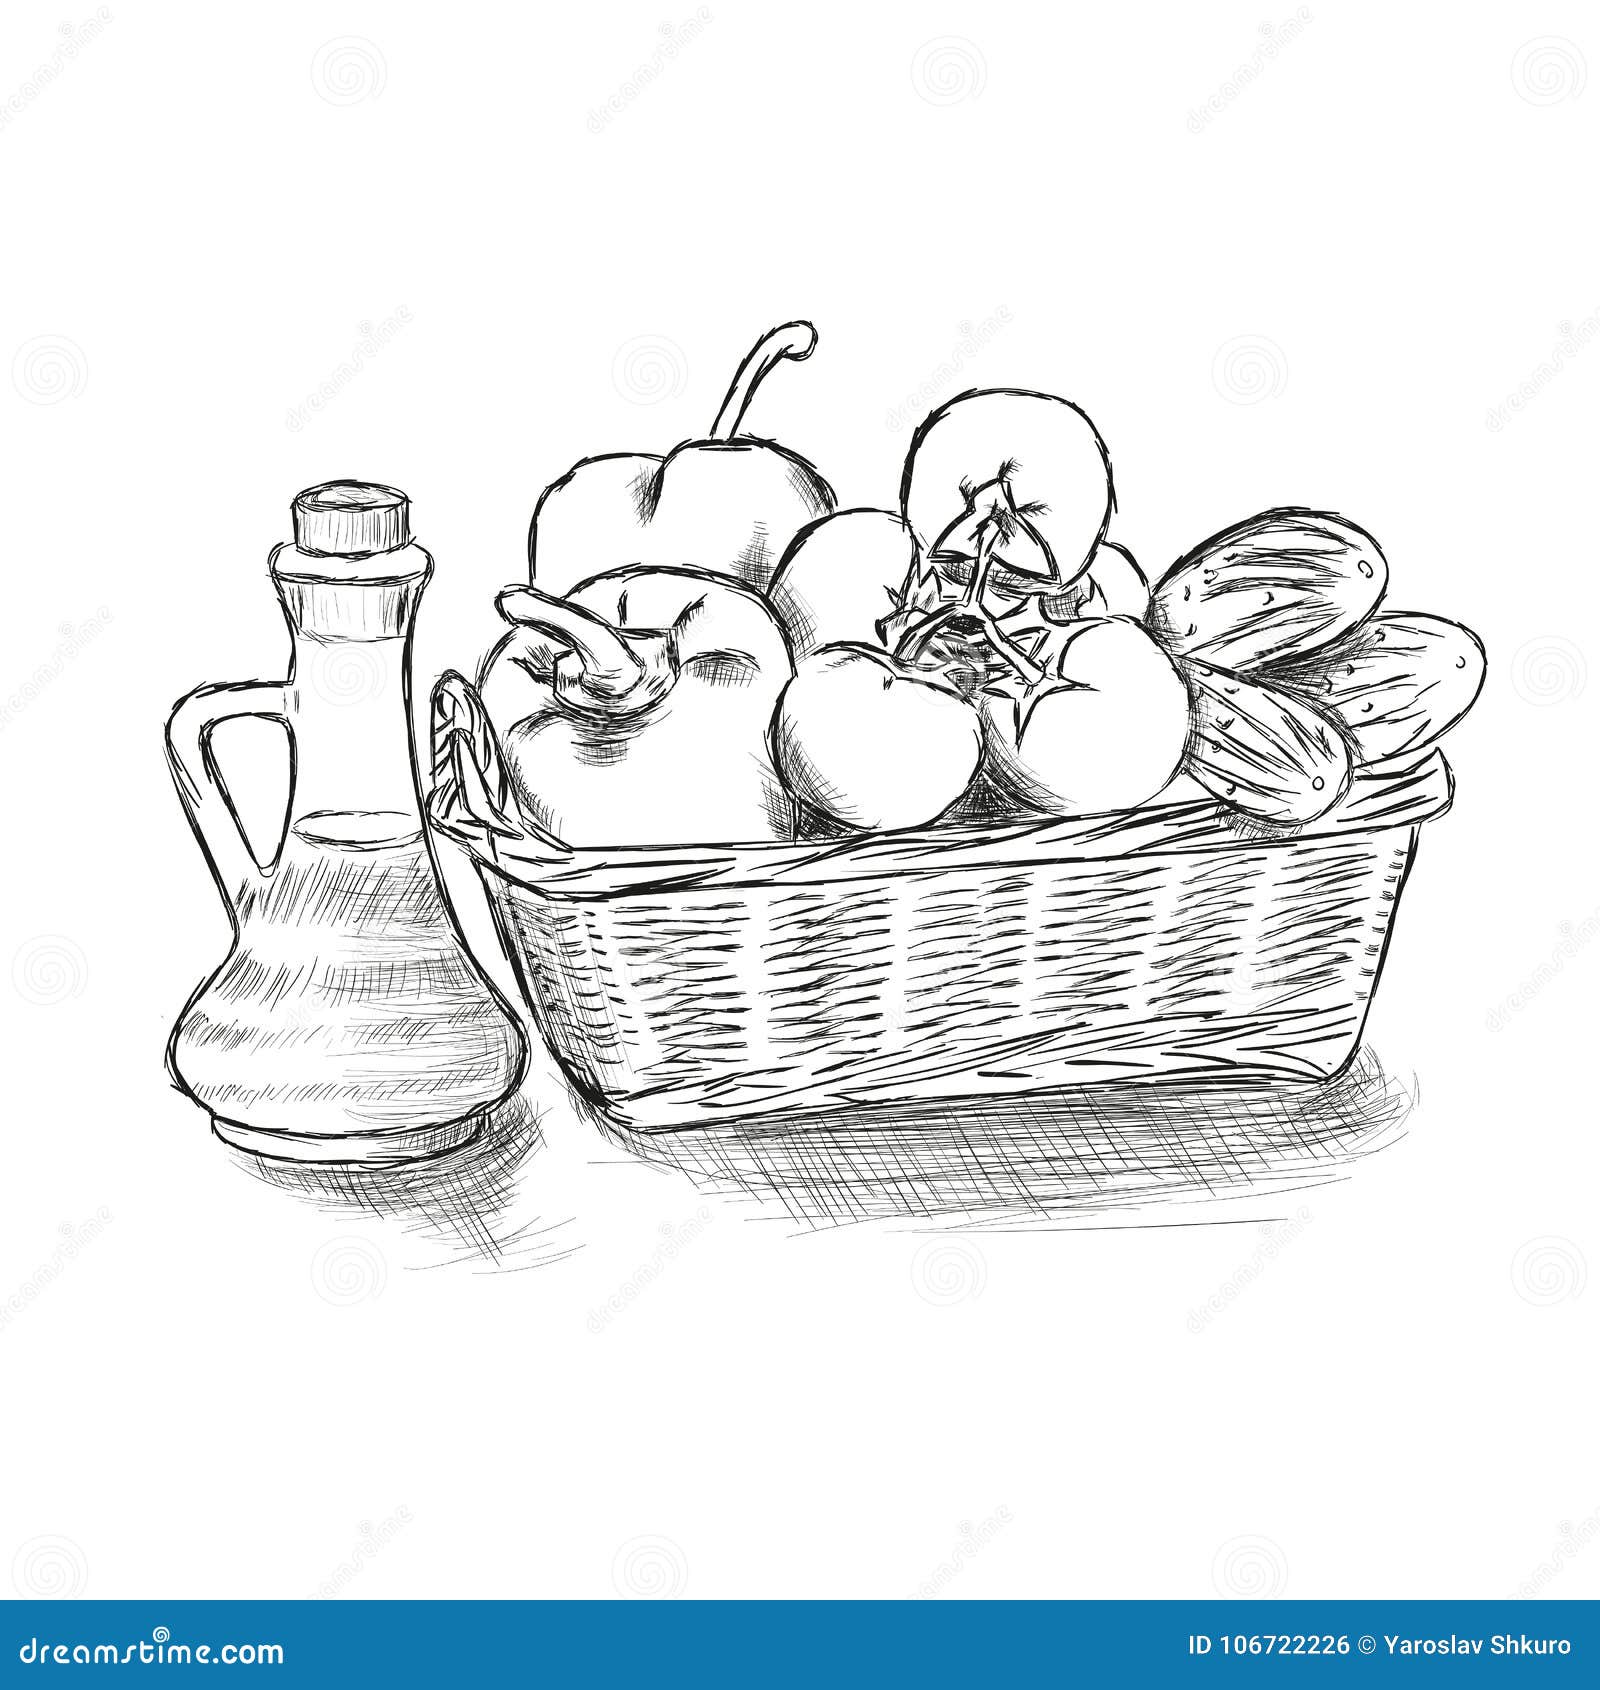 Premium Vector  Woven picnic basket with wine and vegetables picnic food  in basket hand drawn engraving vector